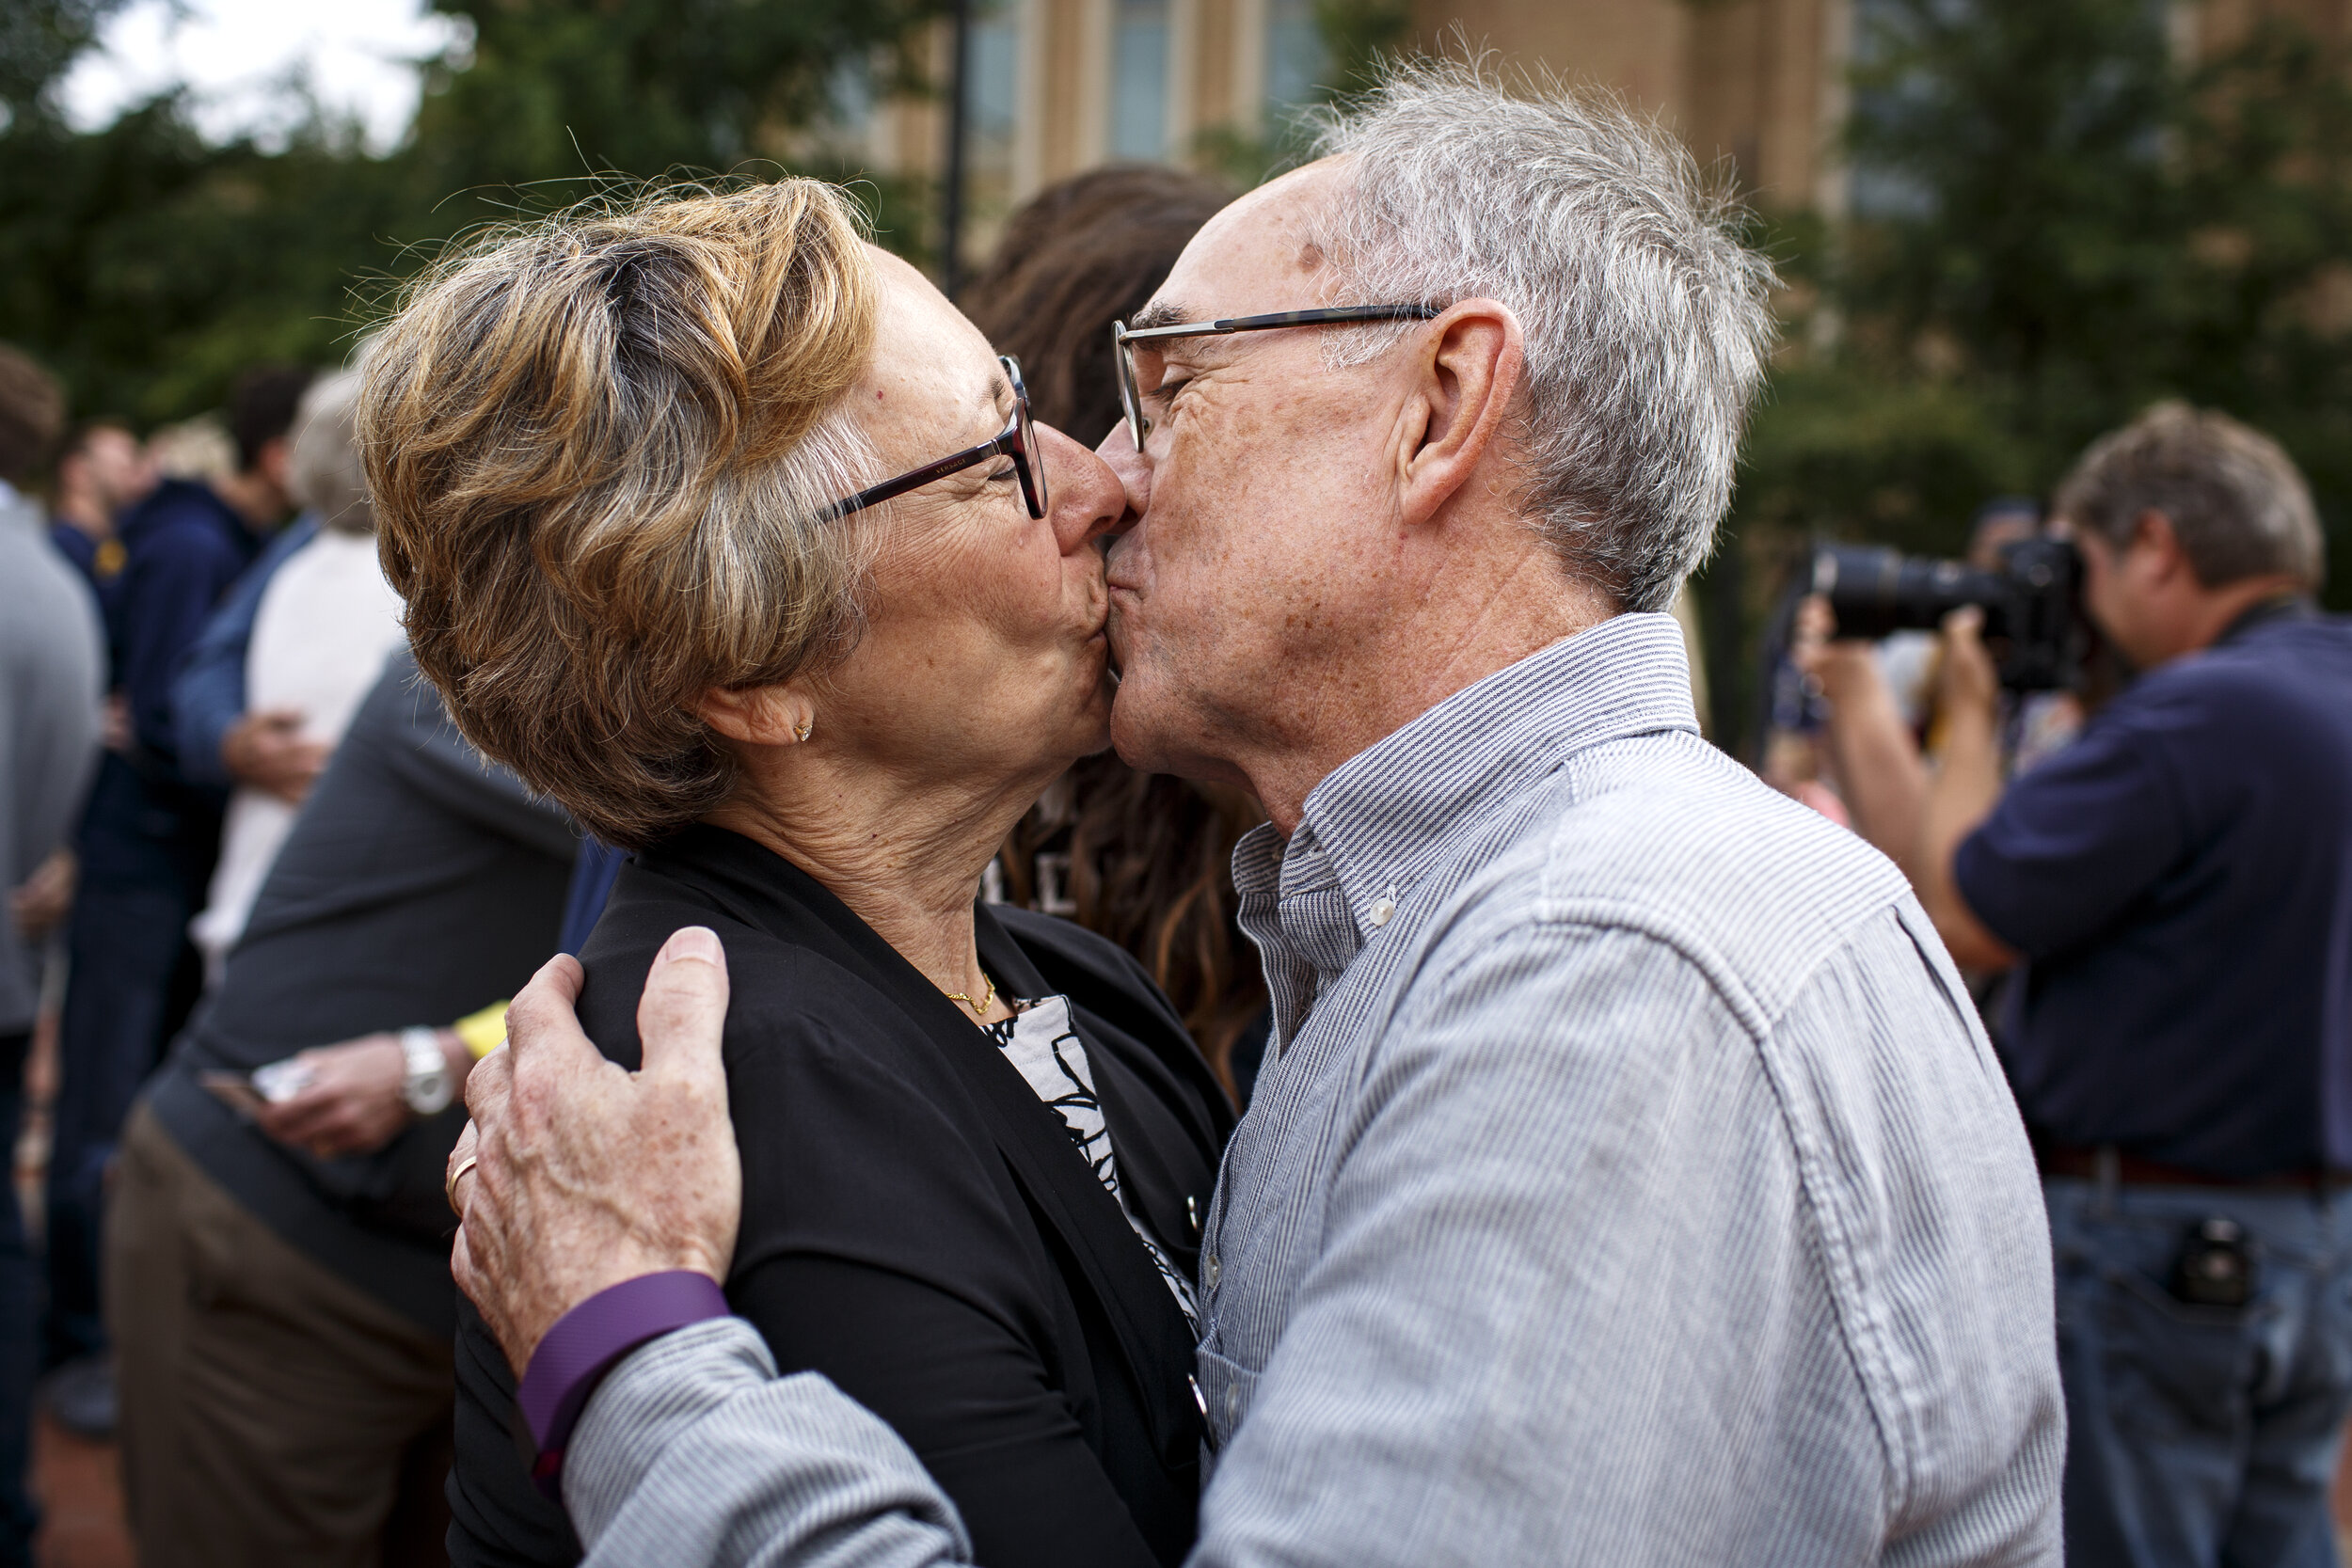  Roderick “Rick” Anstey, a Kent State class of ‘68 alumn, and his wife Francine “Cini” Anstey, a class of ’69 alum, kiss each other during the “Kiss on the K” Homecoming event on Saturday, Oct. 1, 2016 